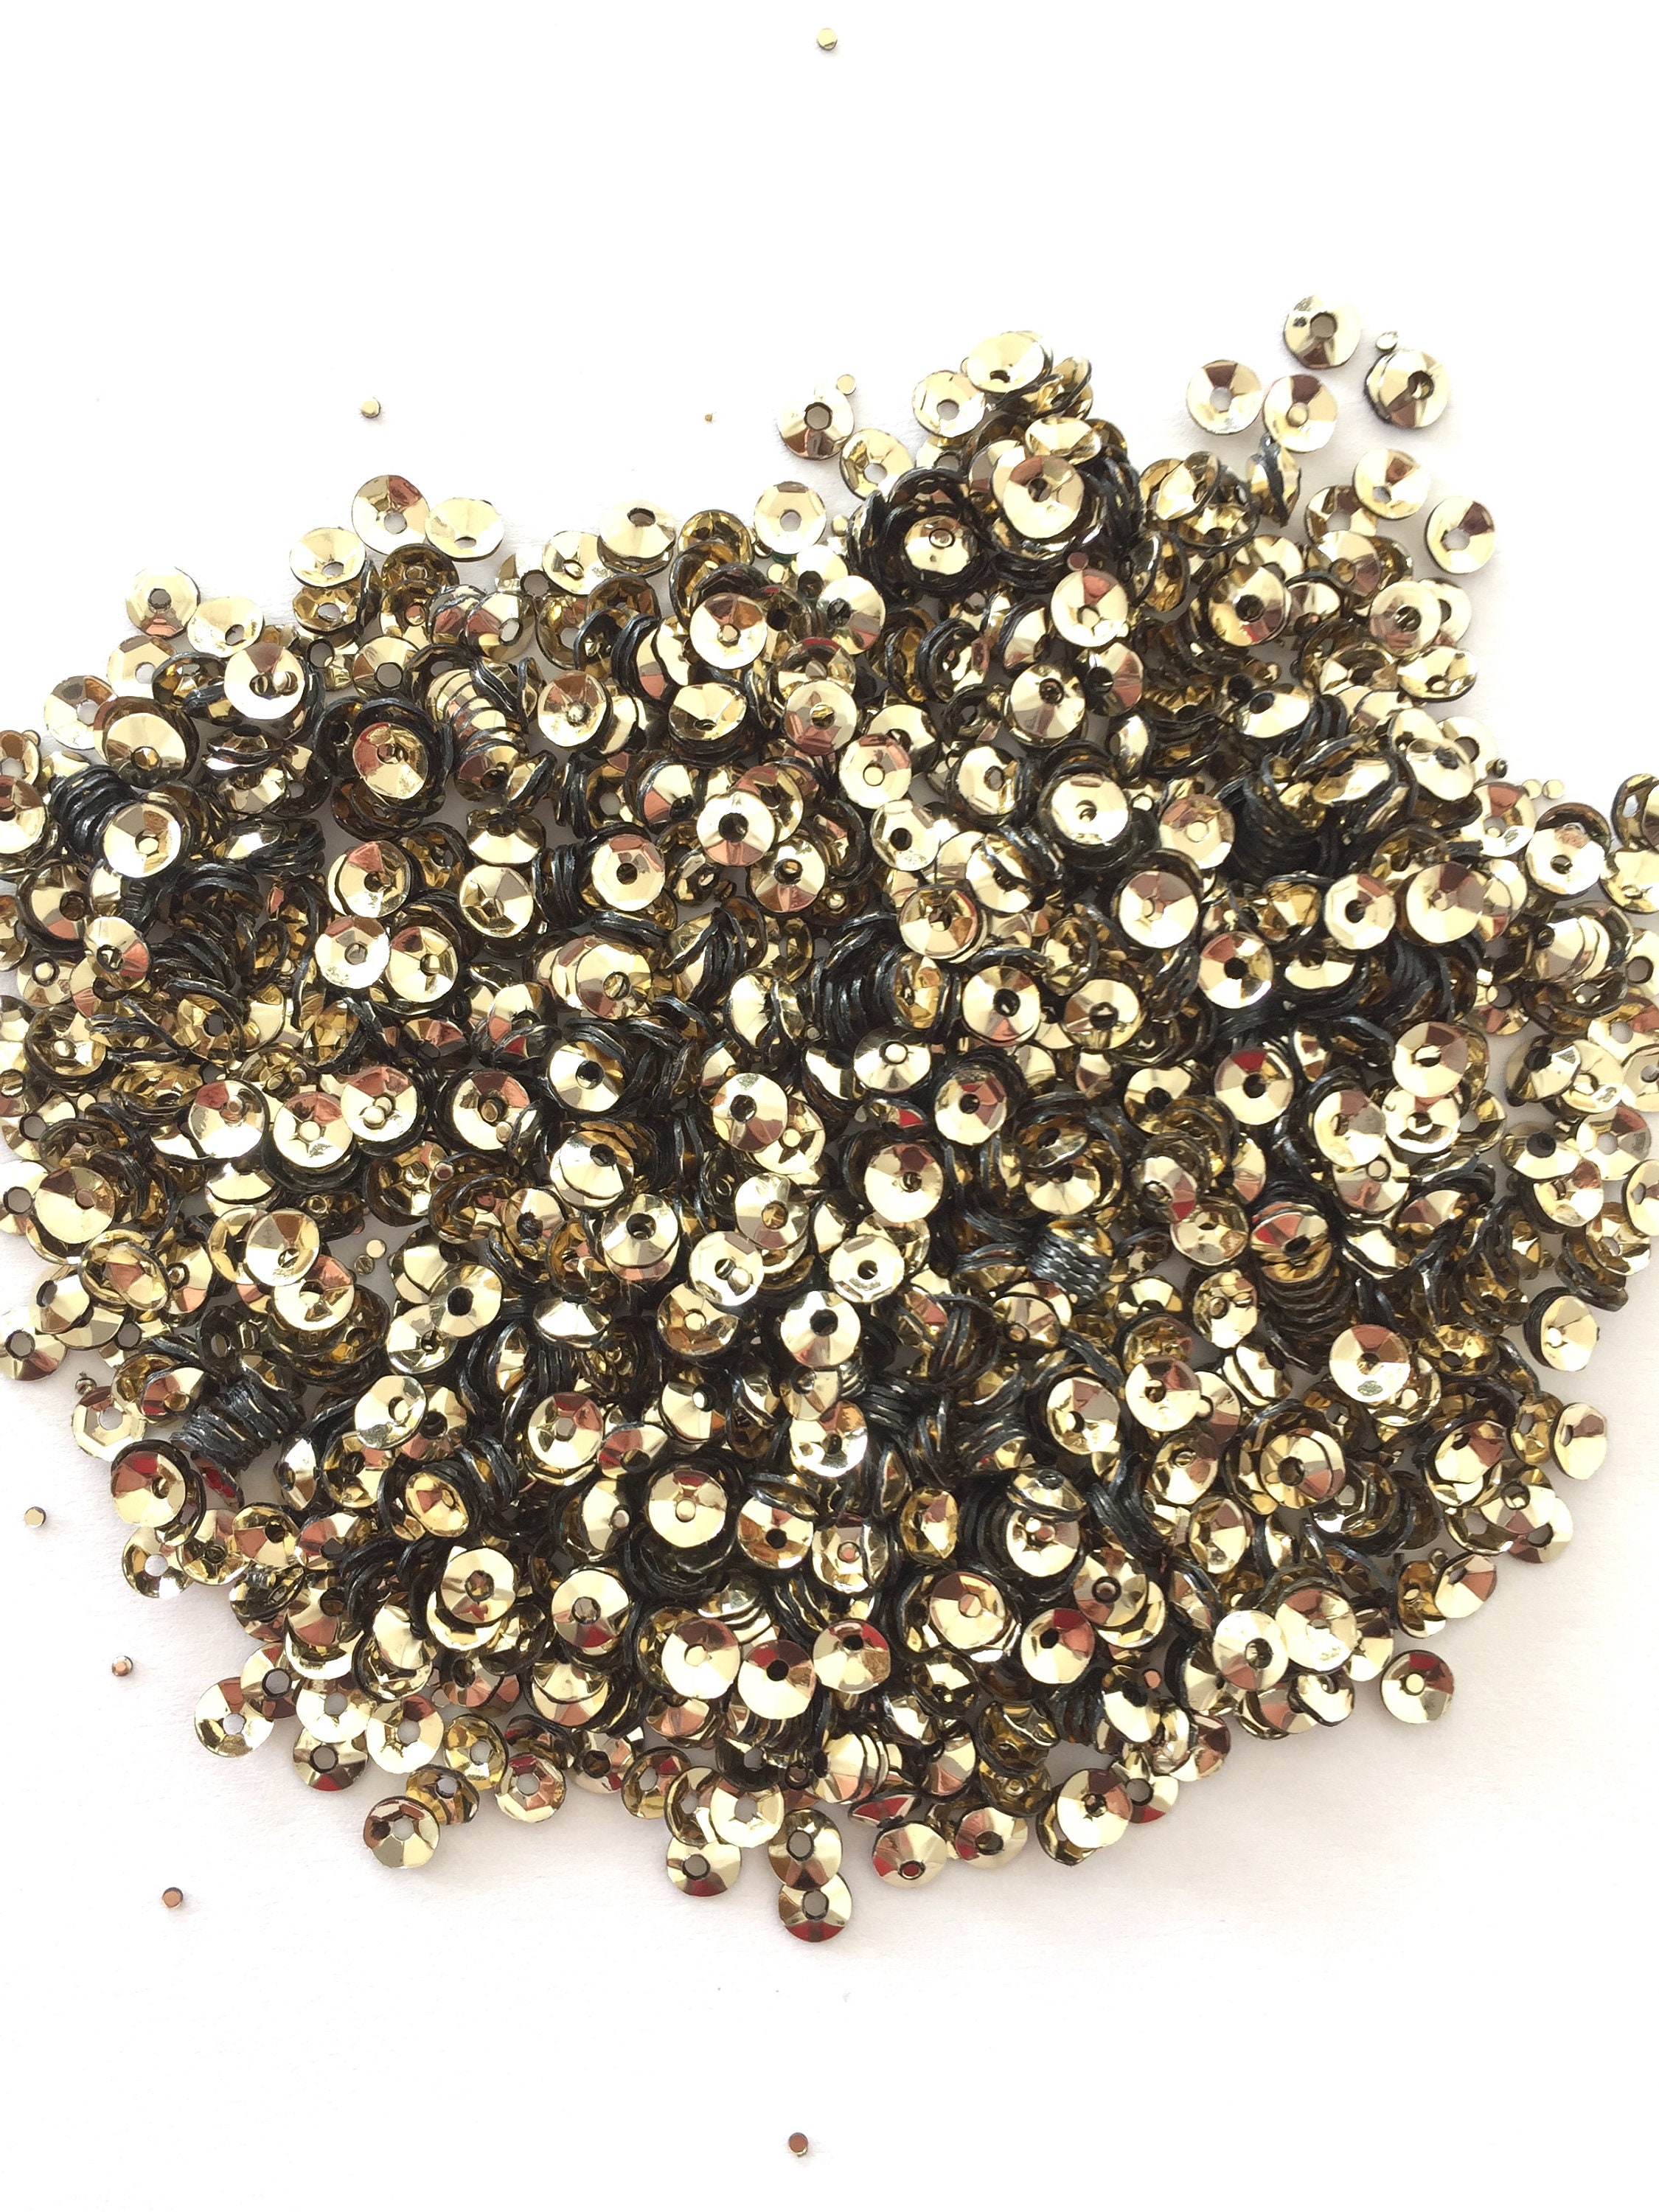 1500 CUP Round loose sequins Paillettes 12mm sewing Wedding craft Colour  Choice